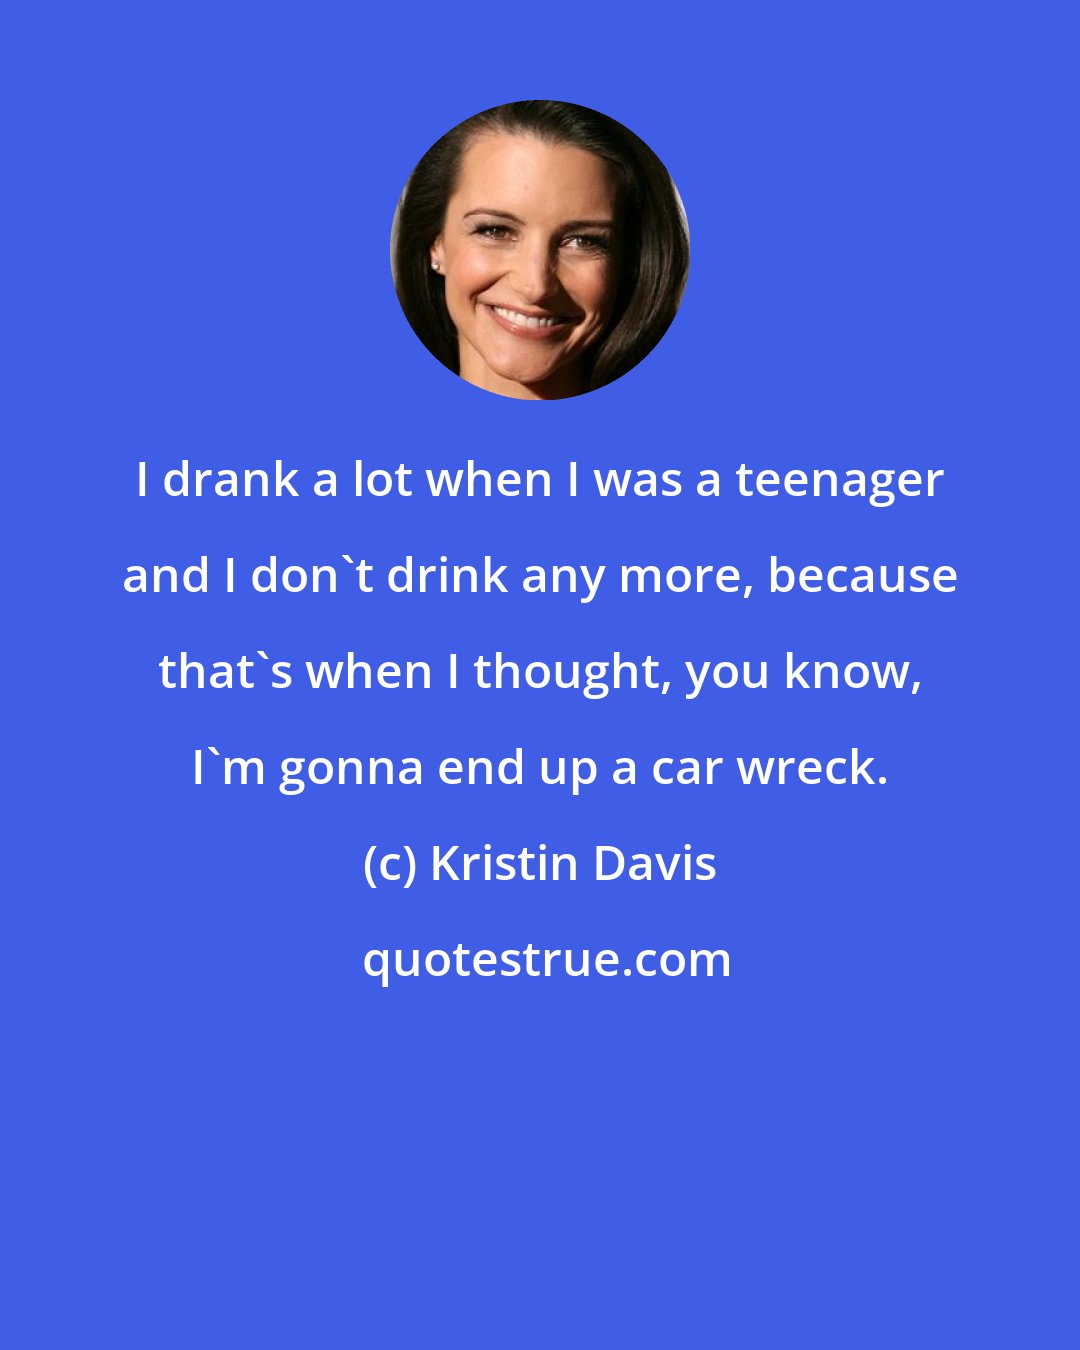 Kristin Davis: I drank a lot when I was a teenager and I don't drink any more, because that's when I thought, you know, I'm gonna end up a car wreck.